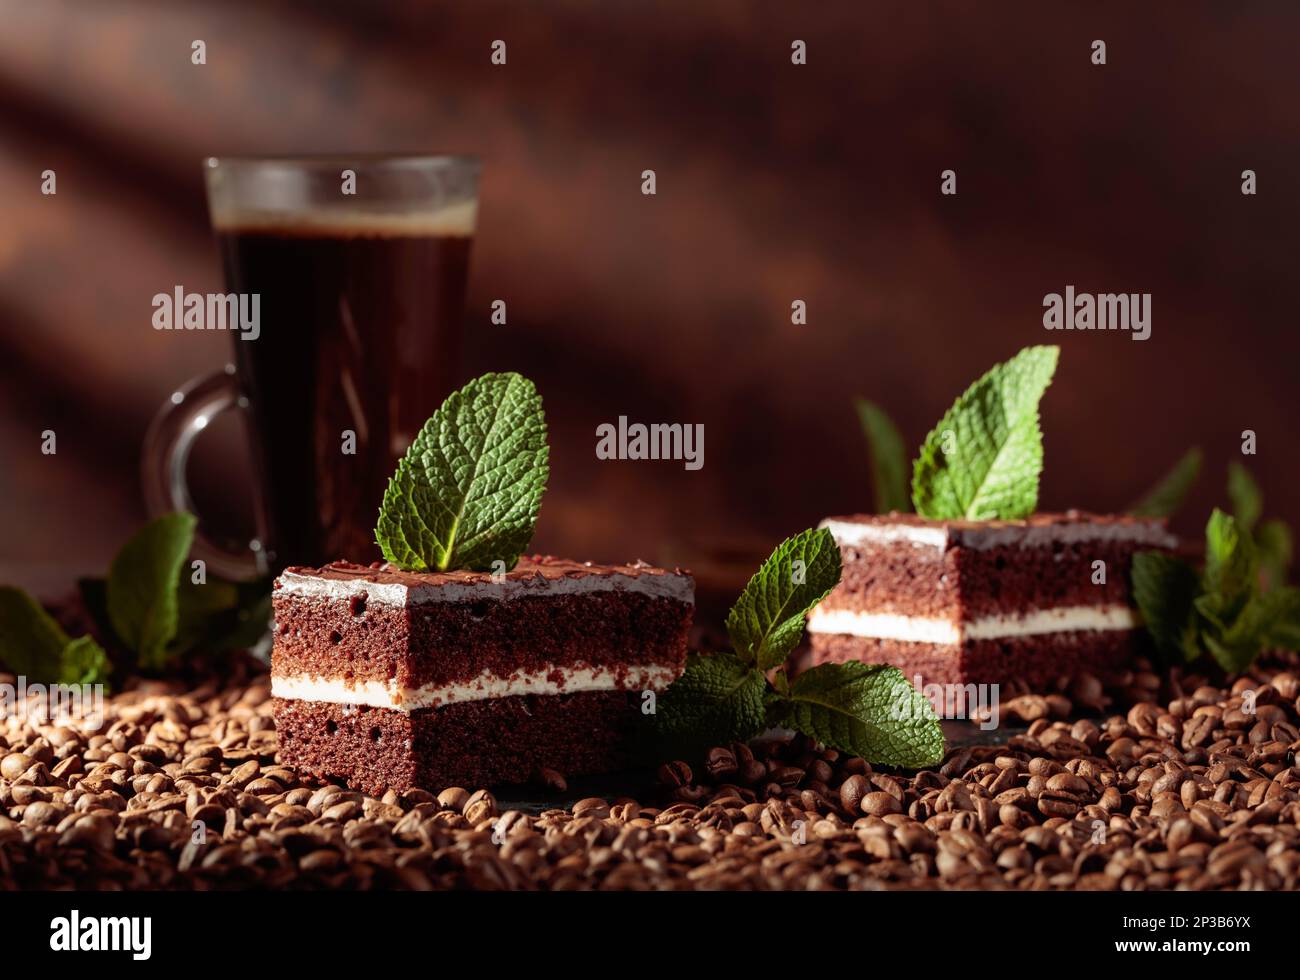 https://c8.alamy.com/comp/2P3B6YX/chocolate-cake-garnished-with-mint-on-a-table-with-coffee-beans-2P3B6YX.jpg